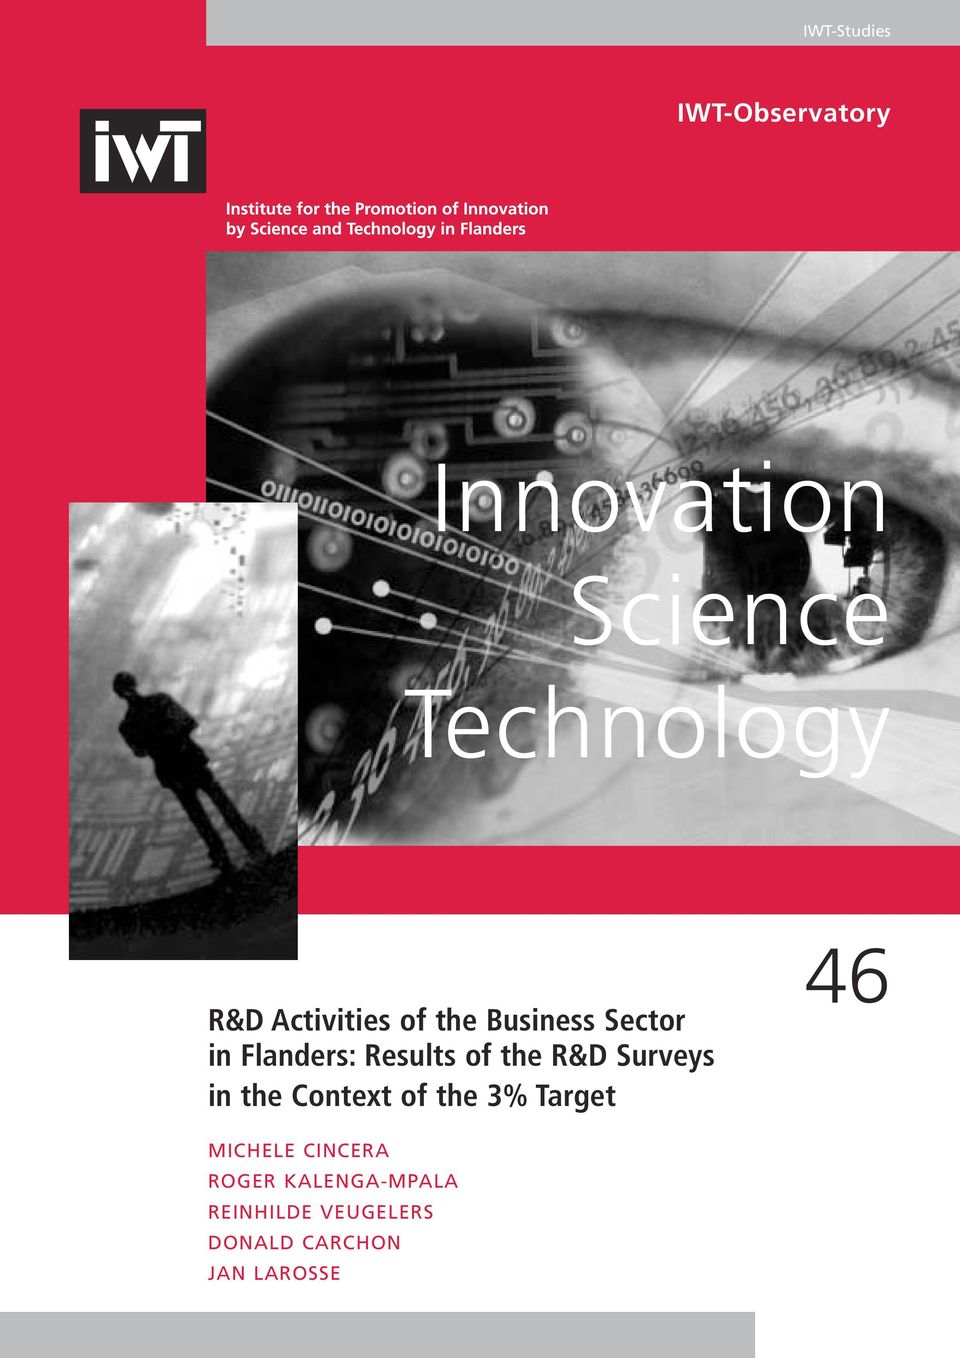 R&D Surveys in the Context of the 3% Target 46 MICHELE CINCERA